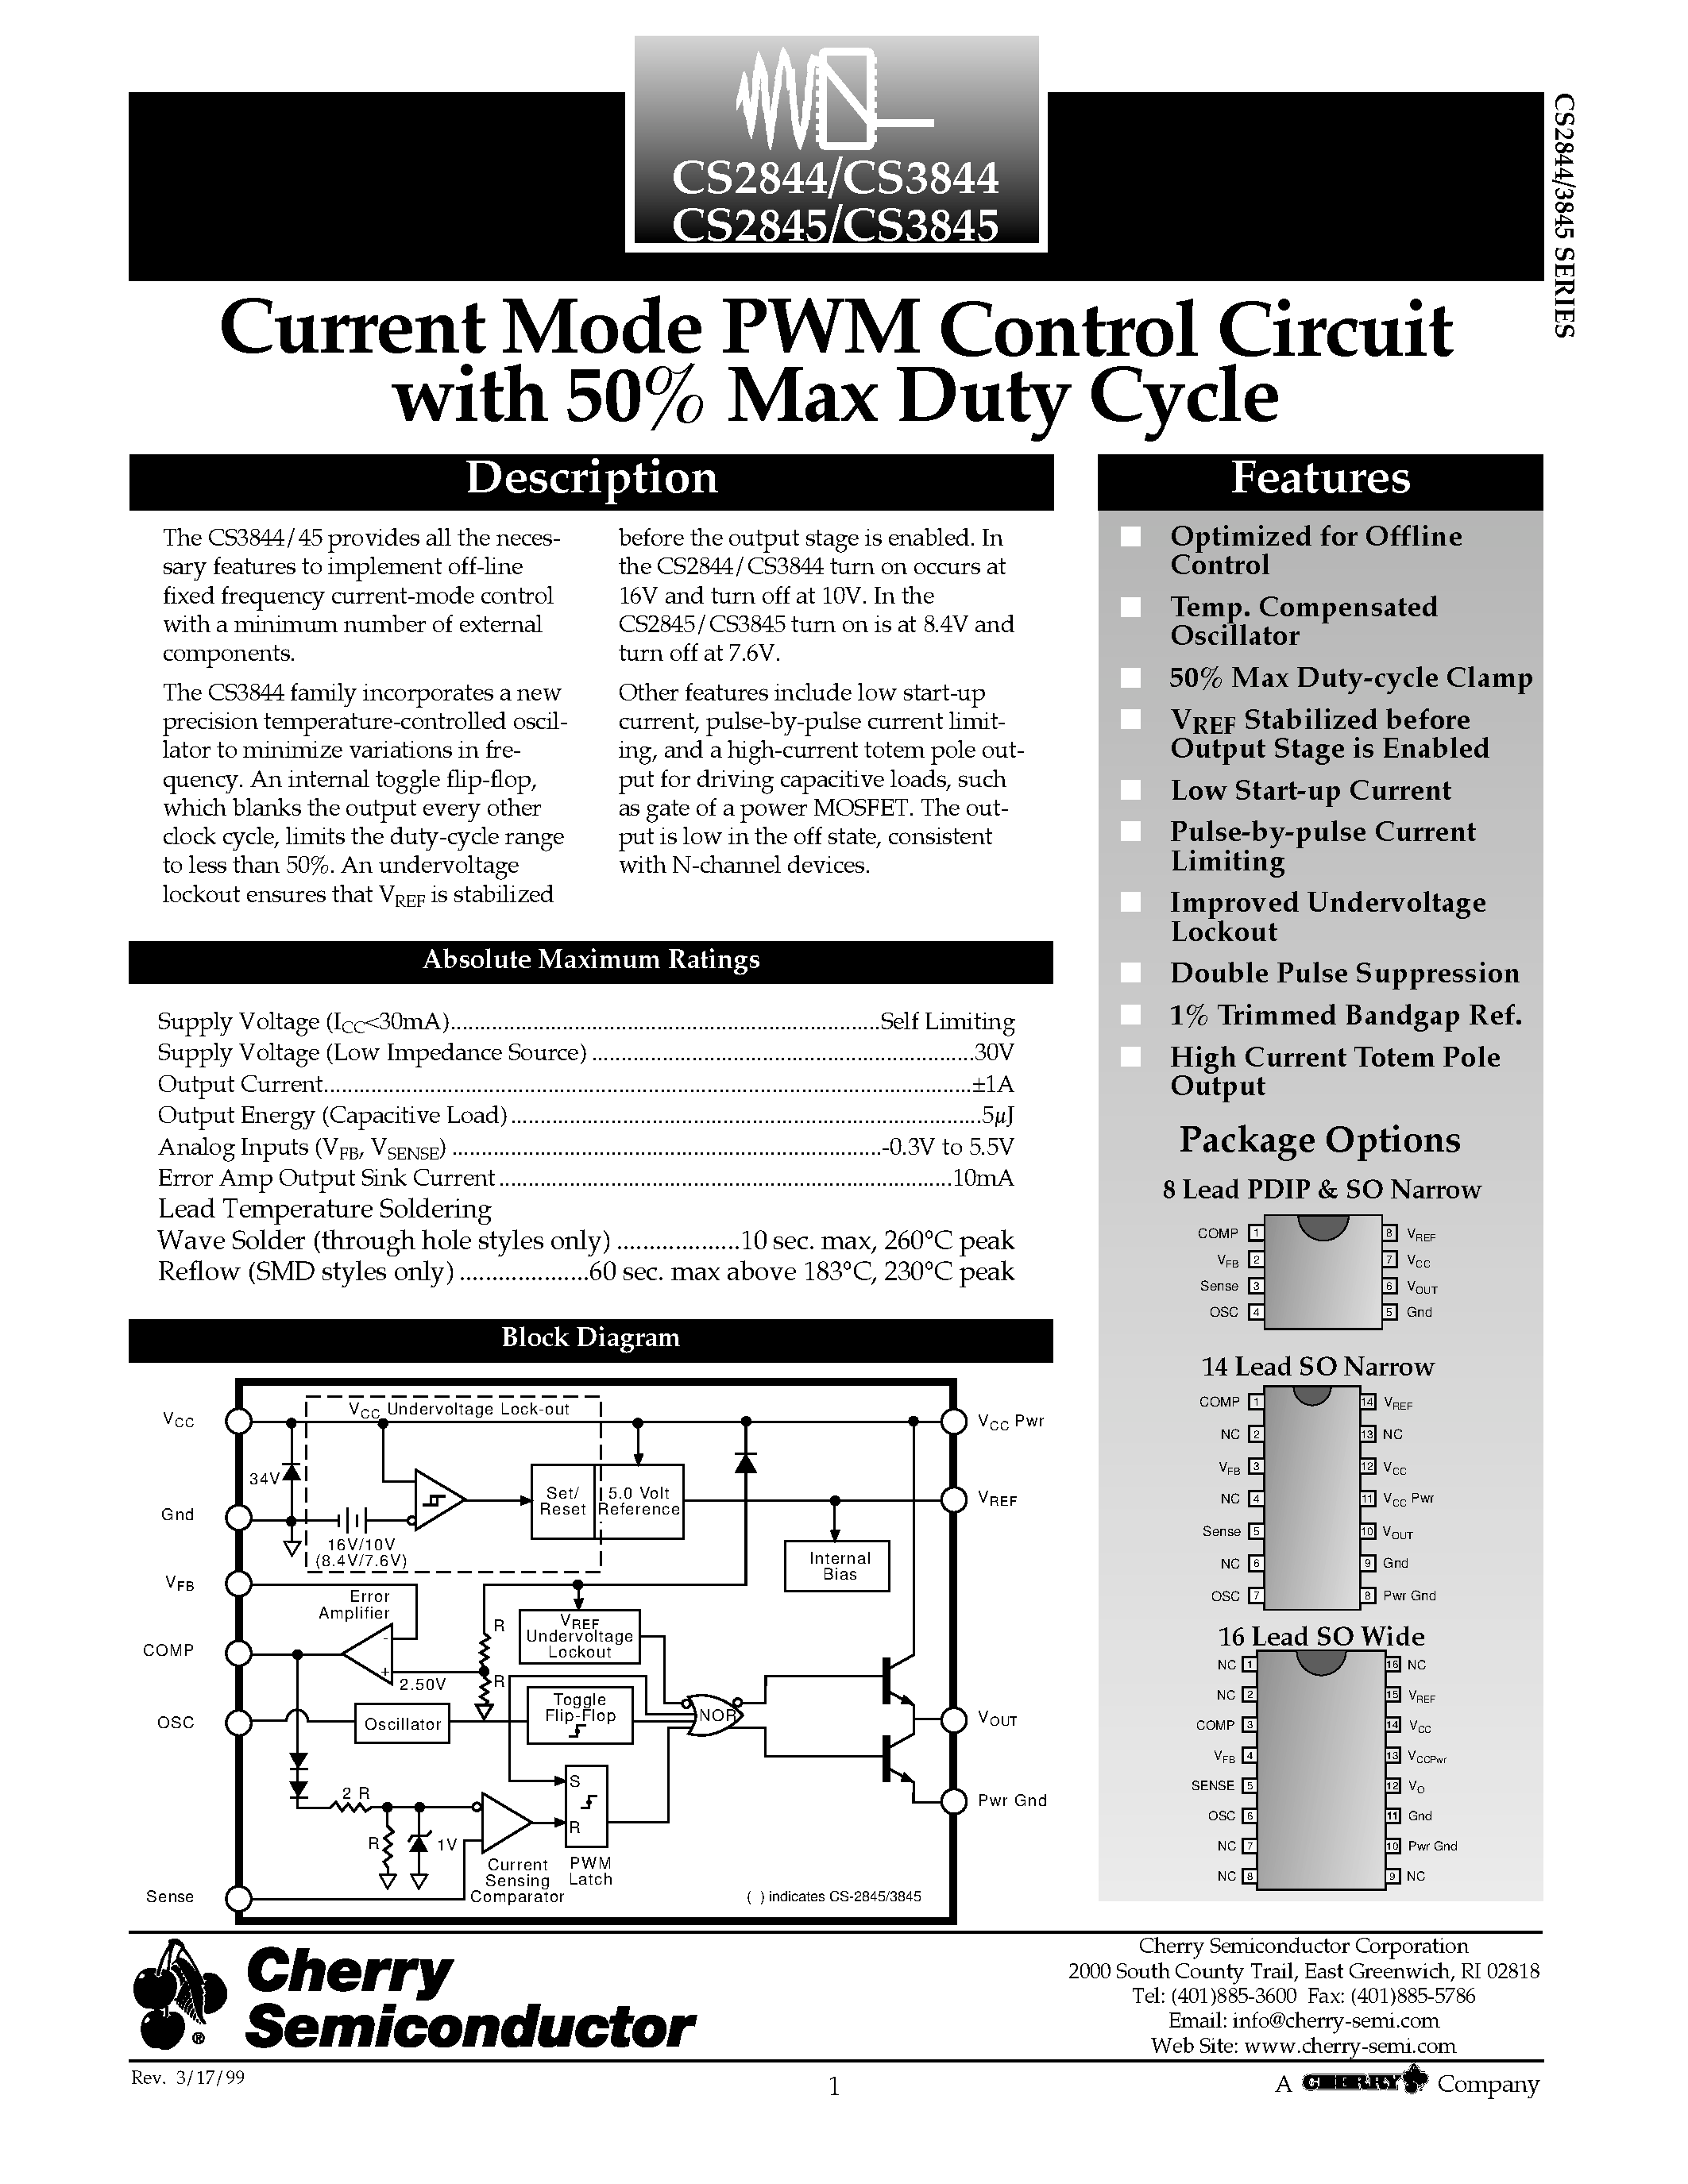 Datasheet CS2845LDW16 - Current Mode PWM Control Circuit with 50% Max Duty Cycle page 1